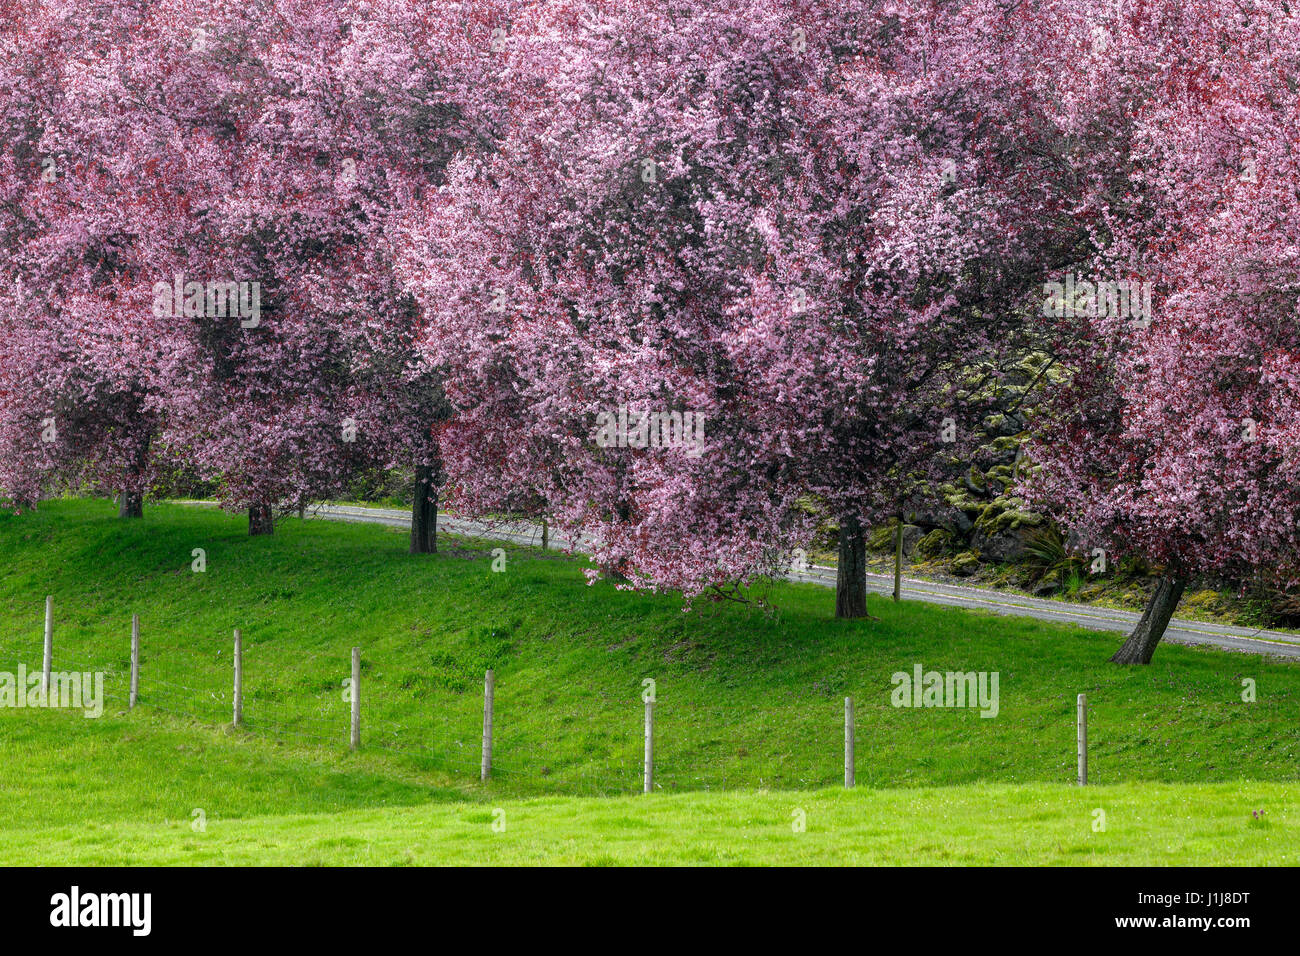 Row of Japanese Cherry blossom trees and fence in rural farmland-Metchosin, British Columbia, Canada. Stock Photo